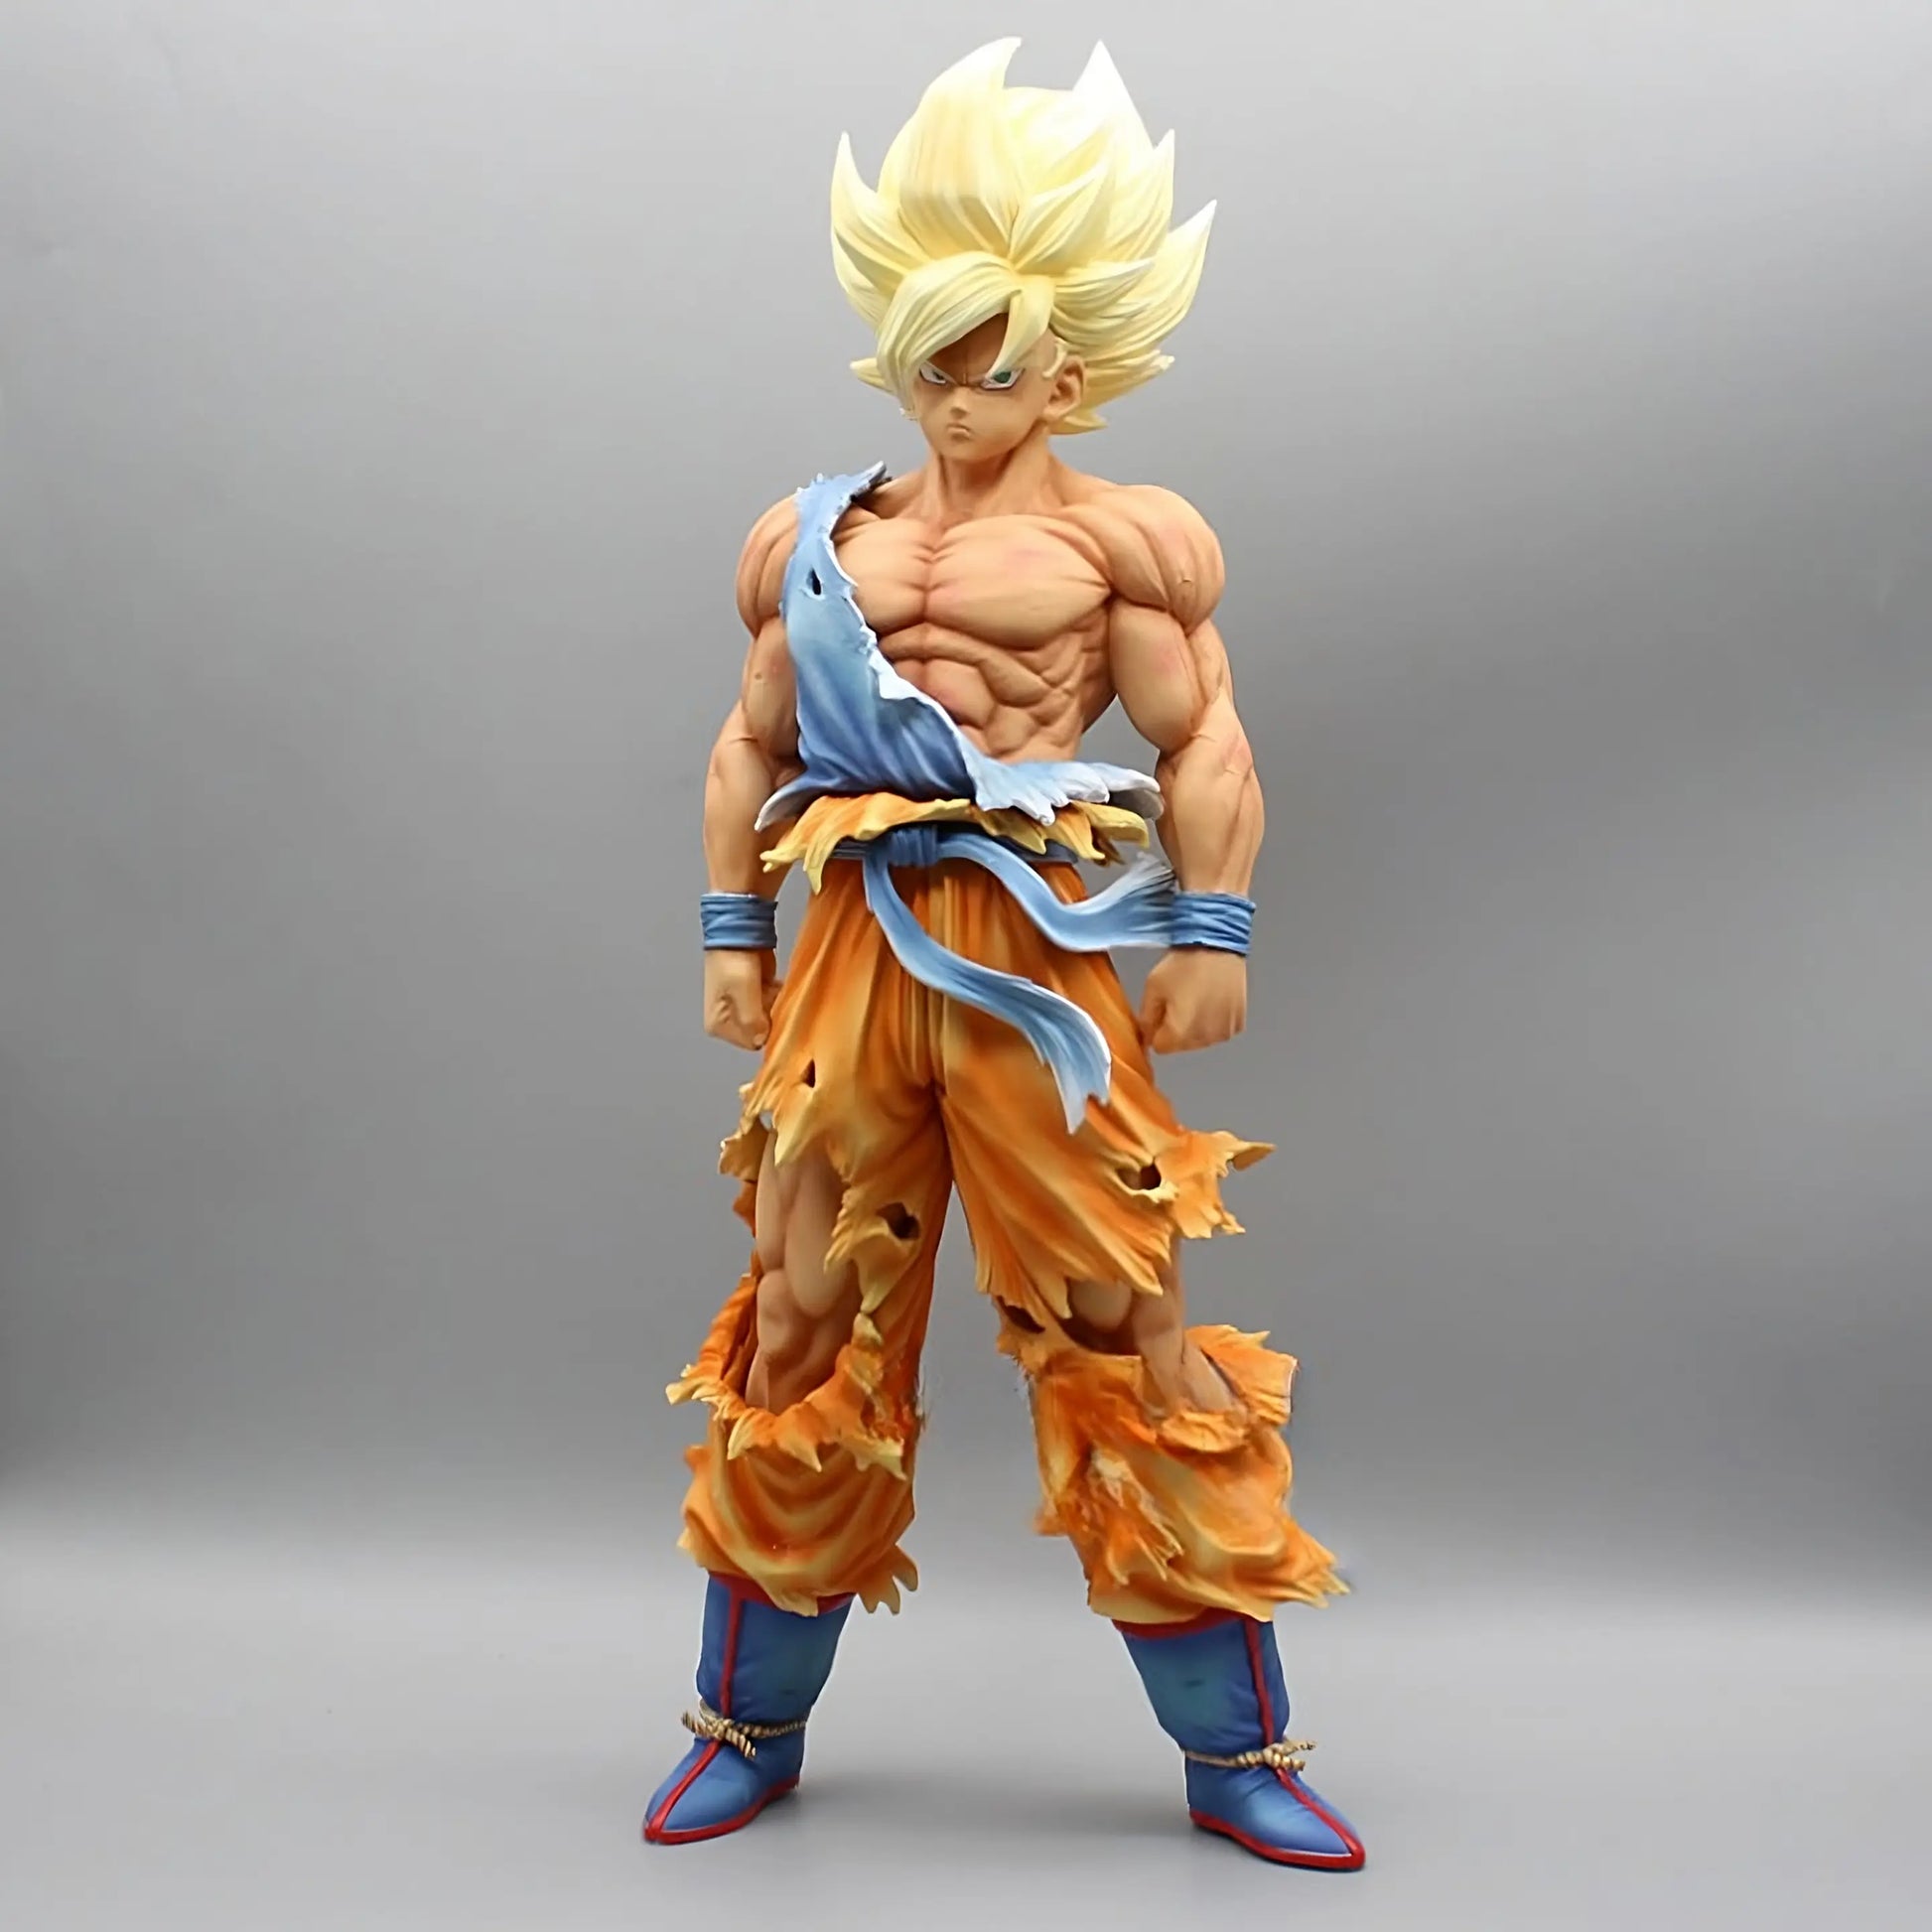 The collectible figure 'Ascend to Saiyan Glory Goku' from Dragon Ball showcases Goku with his signature golden Super Saiyan hair and a muscular build. He's dressed in a battle-worn orange gi torn to reveal his physique, standing confidently in blue boots, with the focus on his intense expression and the power of his Saiyan form, all against a neutral background.